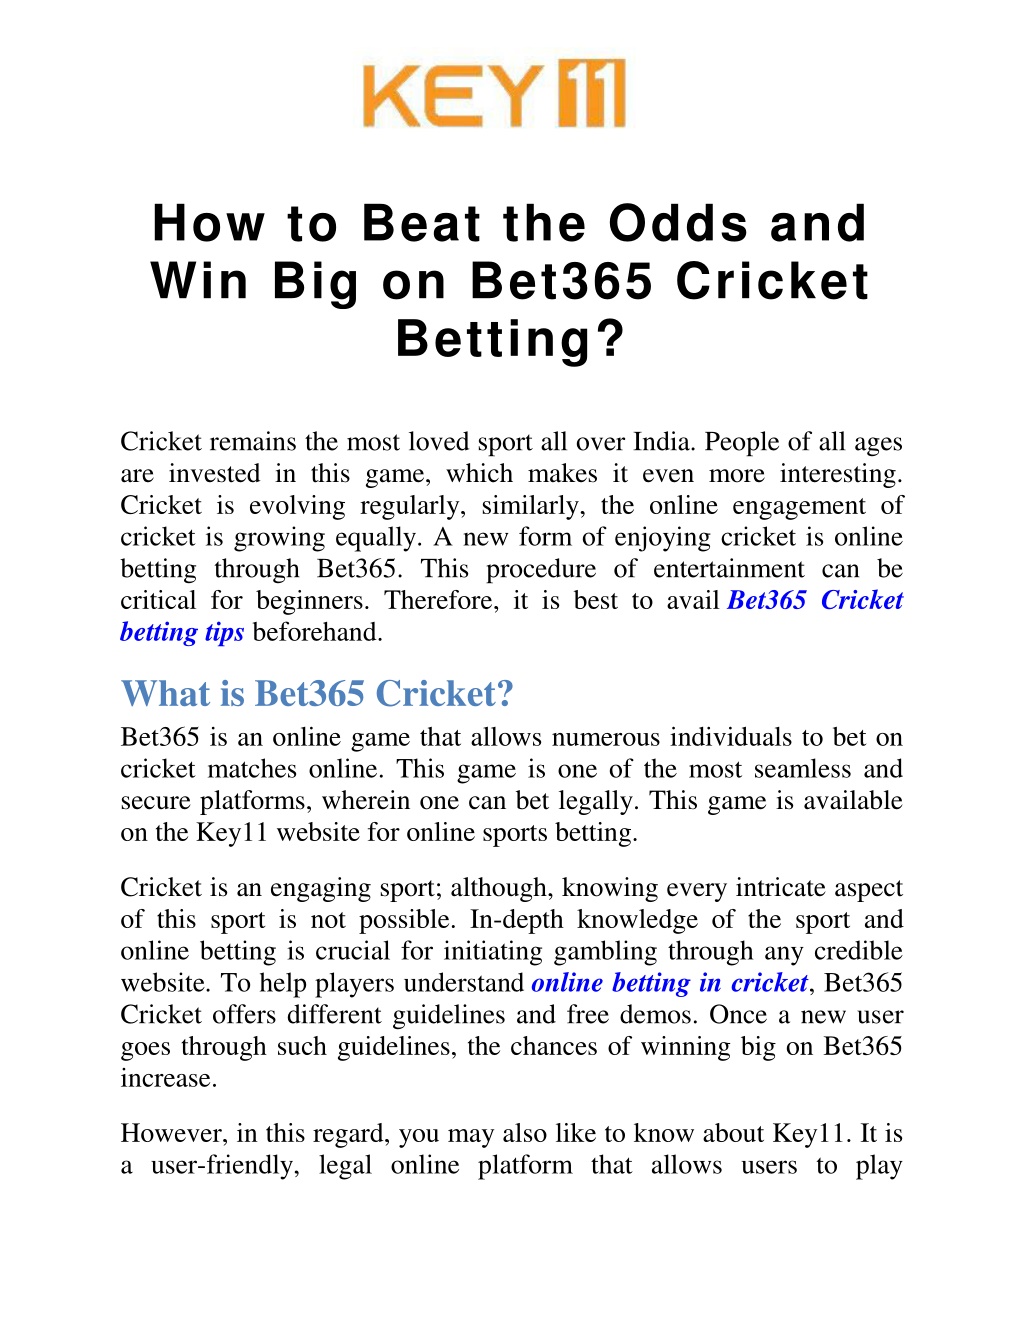 how to beat the odds and win big on bet365 l.w